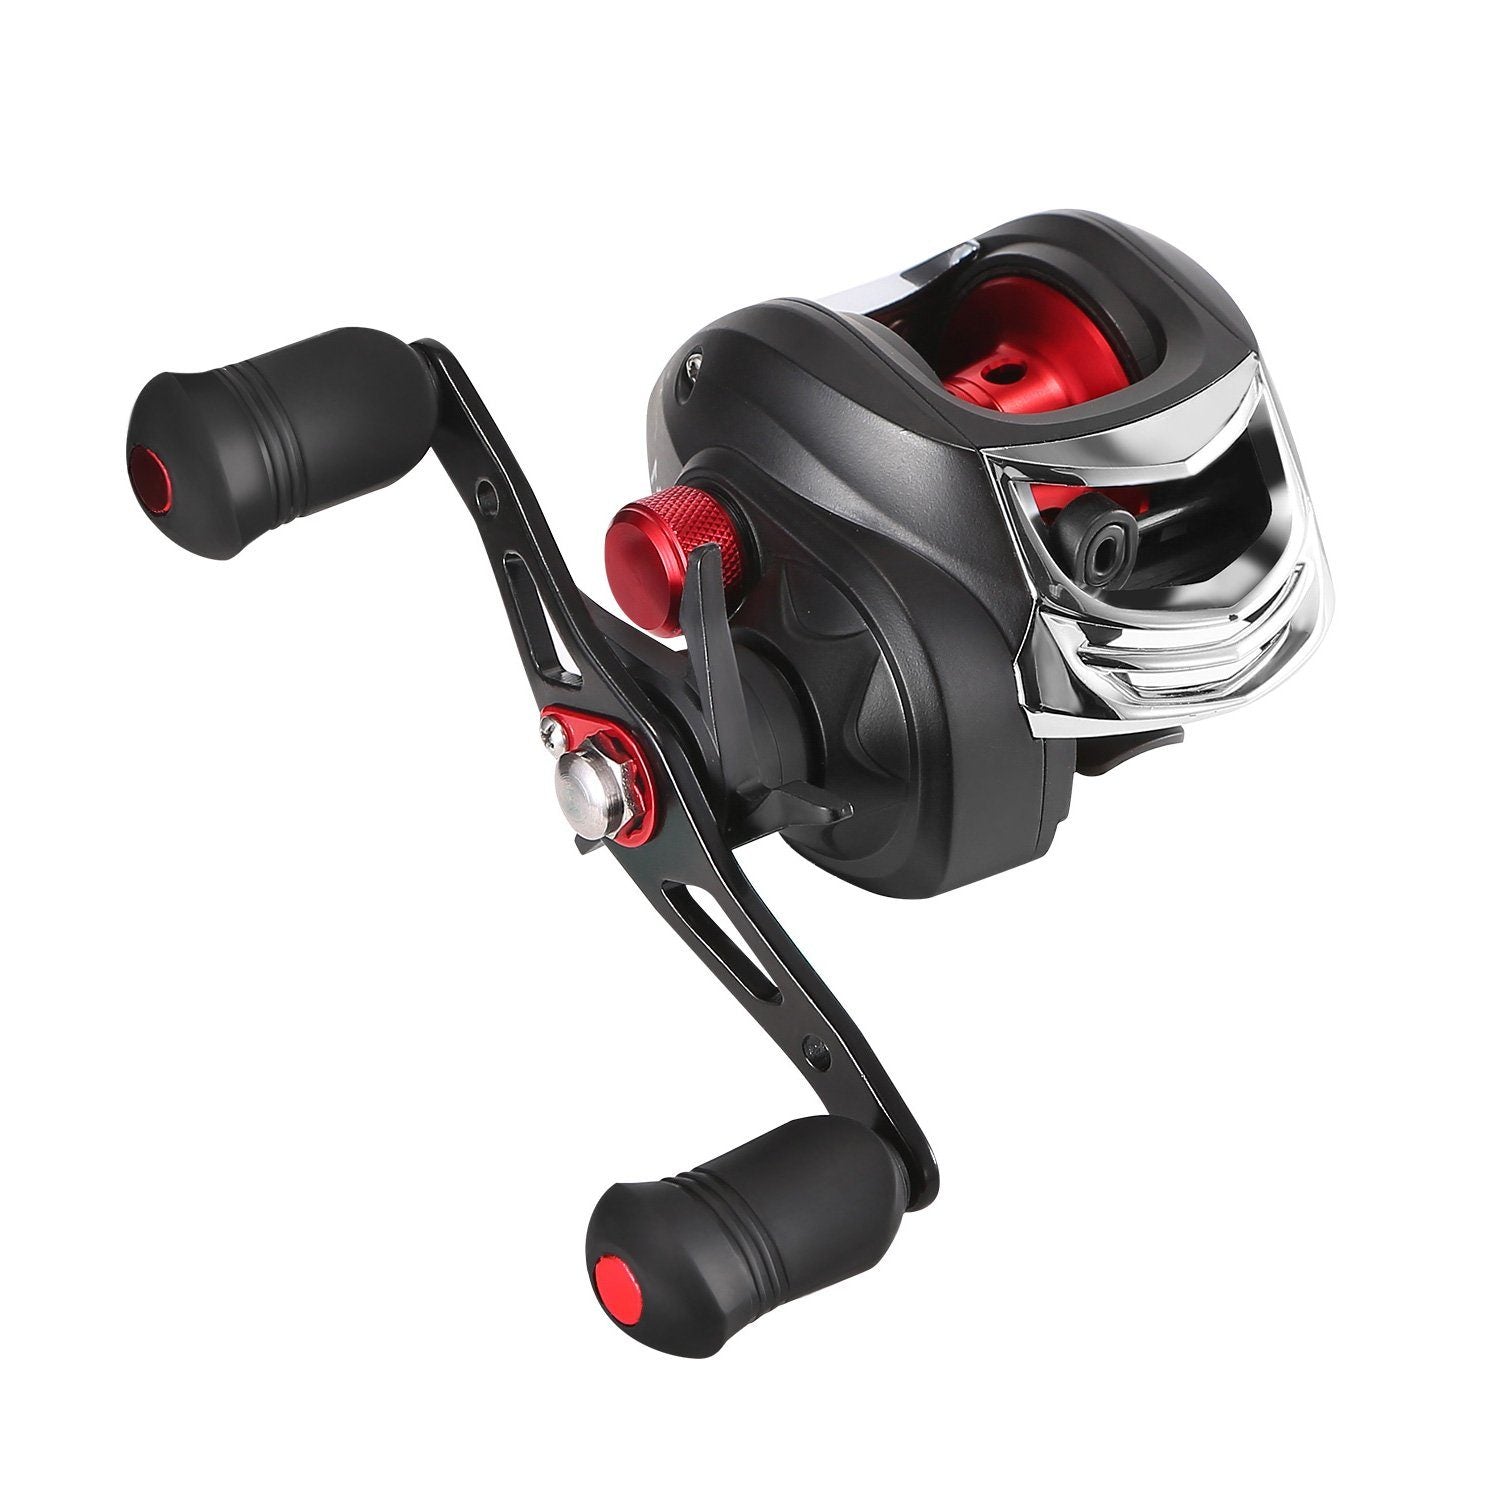 DailySale Baitcasting Fishing Reel High Speed Long Cast Distance